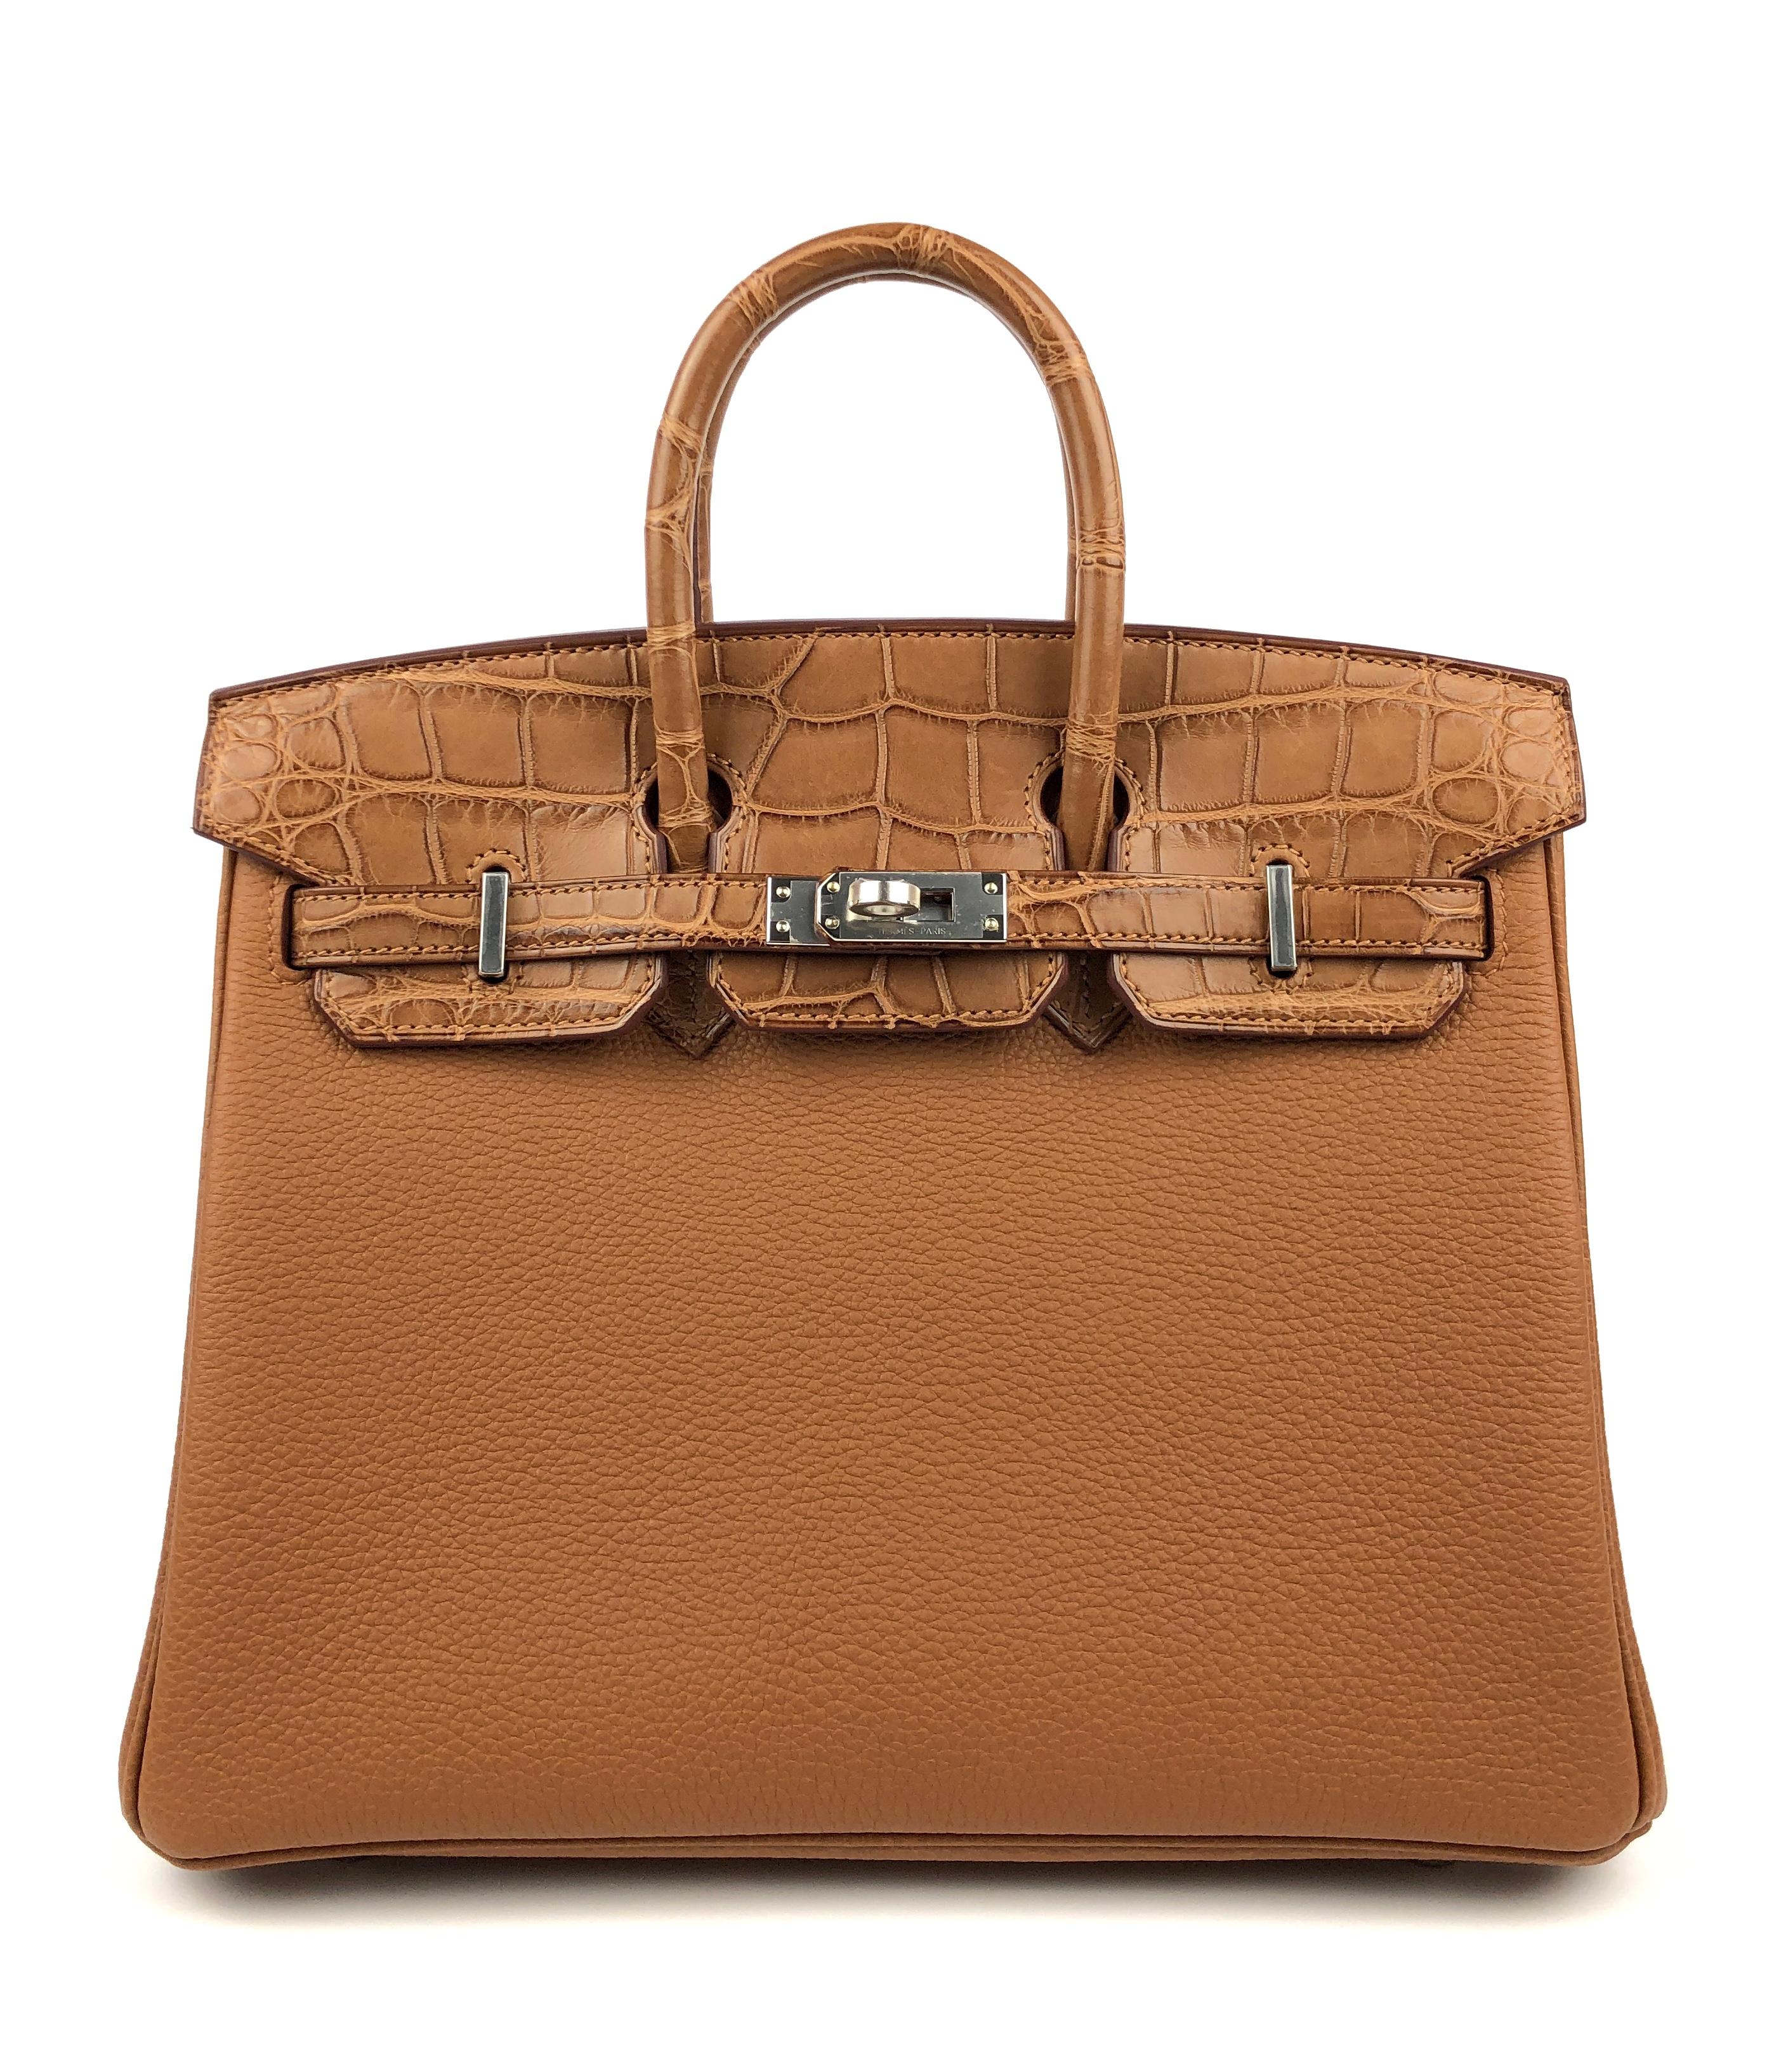 Ultra Rare and the Only ONE for Sale! Brand New Hermes Birkin 25 Touch Gold Togo Leather and Matte Alligator Palladium Hardware. New Z Stamp 2021 full set with Cites.

Shop With Confidence from Lux Addicts. Authenticity Guaranteed!